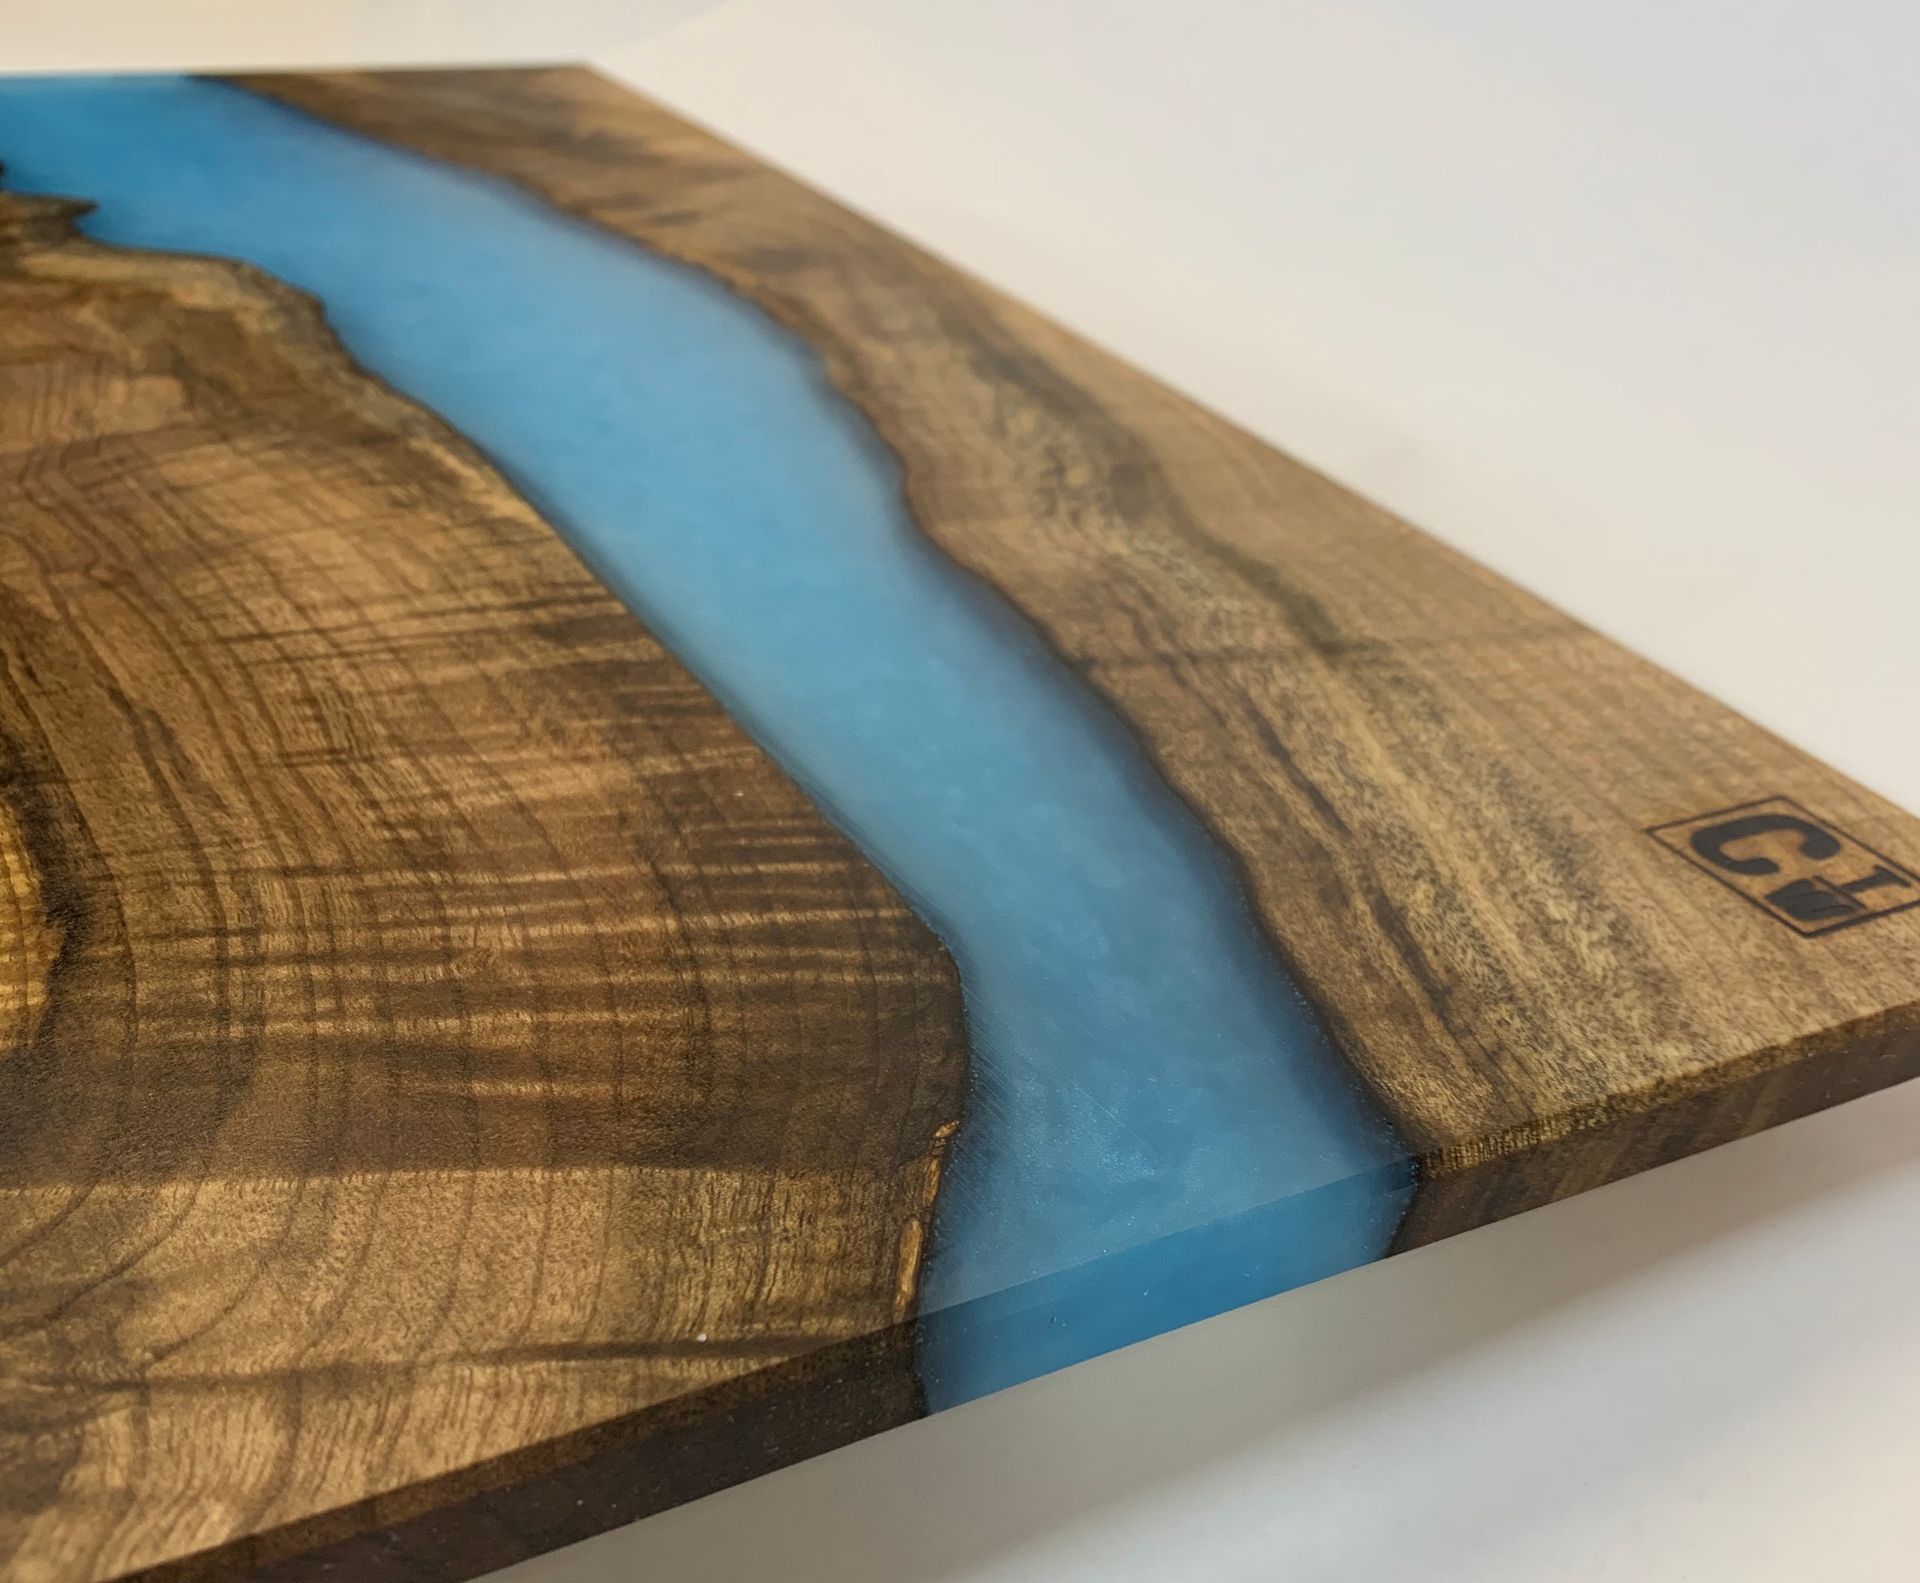 A piece of wood with a blue river running through it